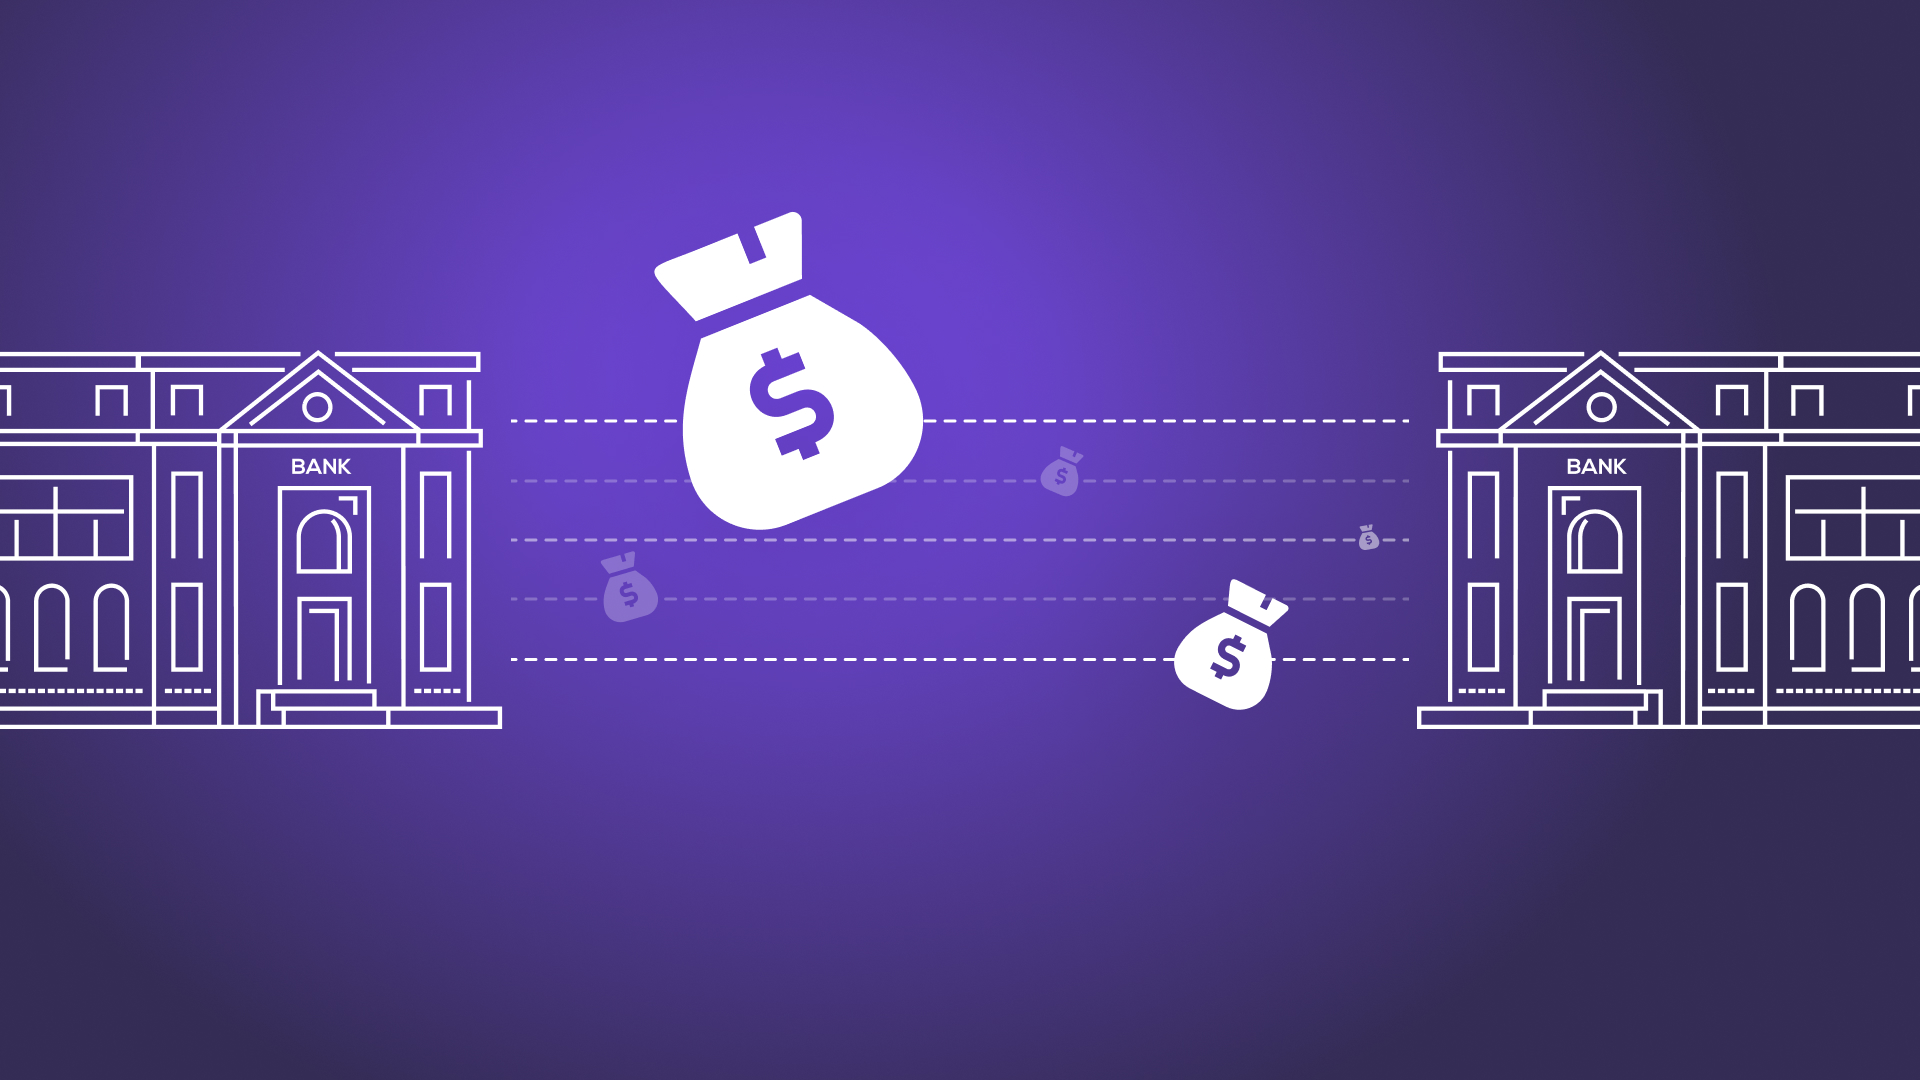 Purple background with two graphics of banks on either side with dotted lines and money bag graphics placed between to signify electronic money transfers between financial institutions.